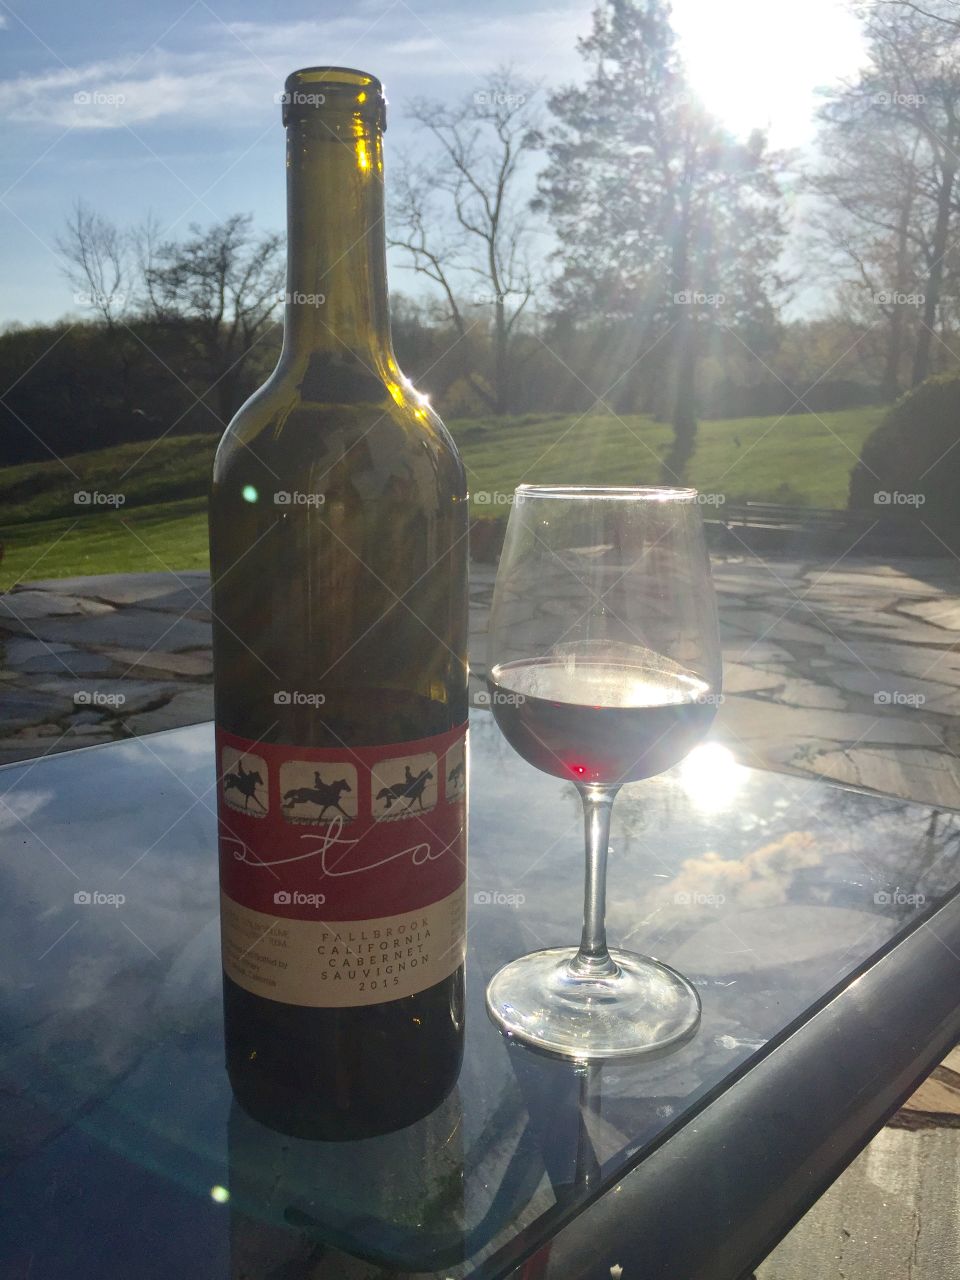 Wine glass and bottle of red to enjoy on a sunny day 